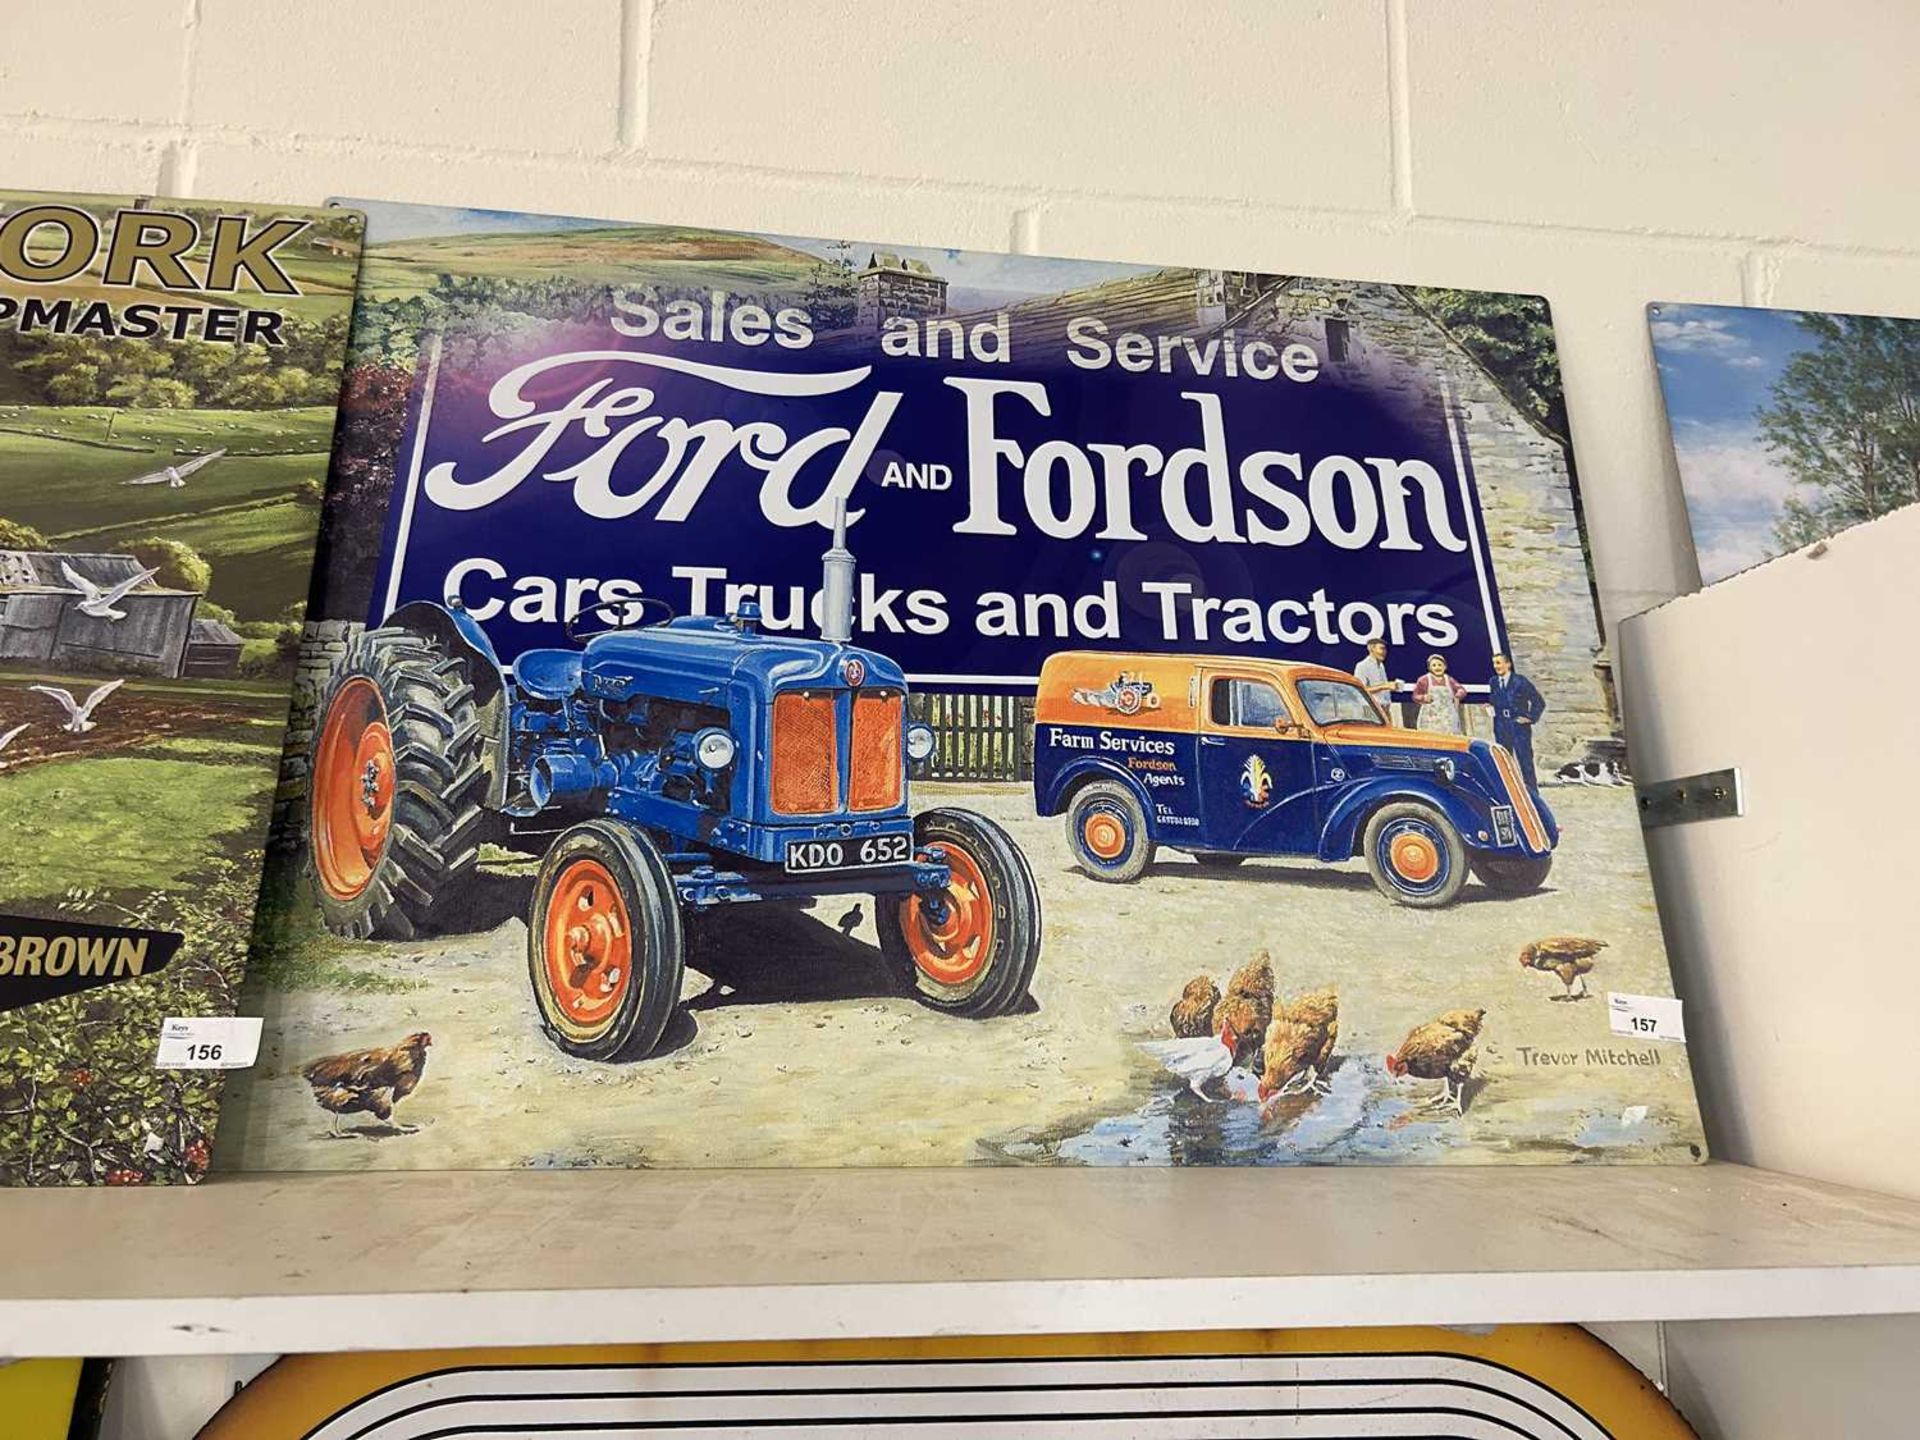 Reproduction Ford and Fordson Cars, Trucks and Tractors thin metal sign